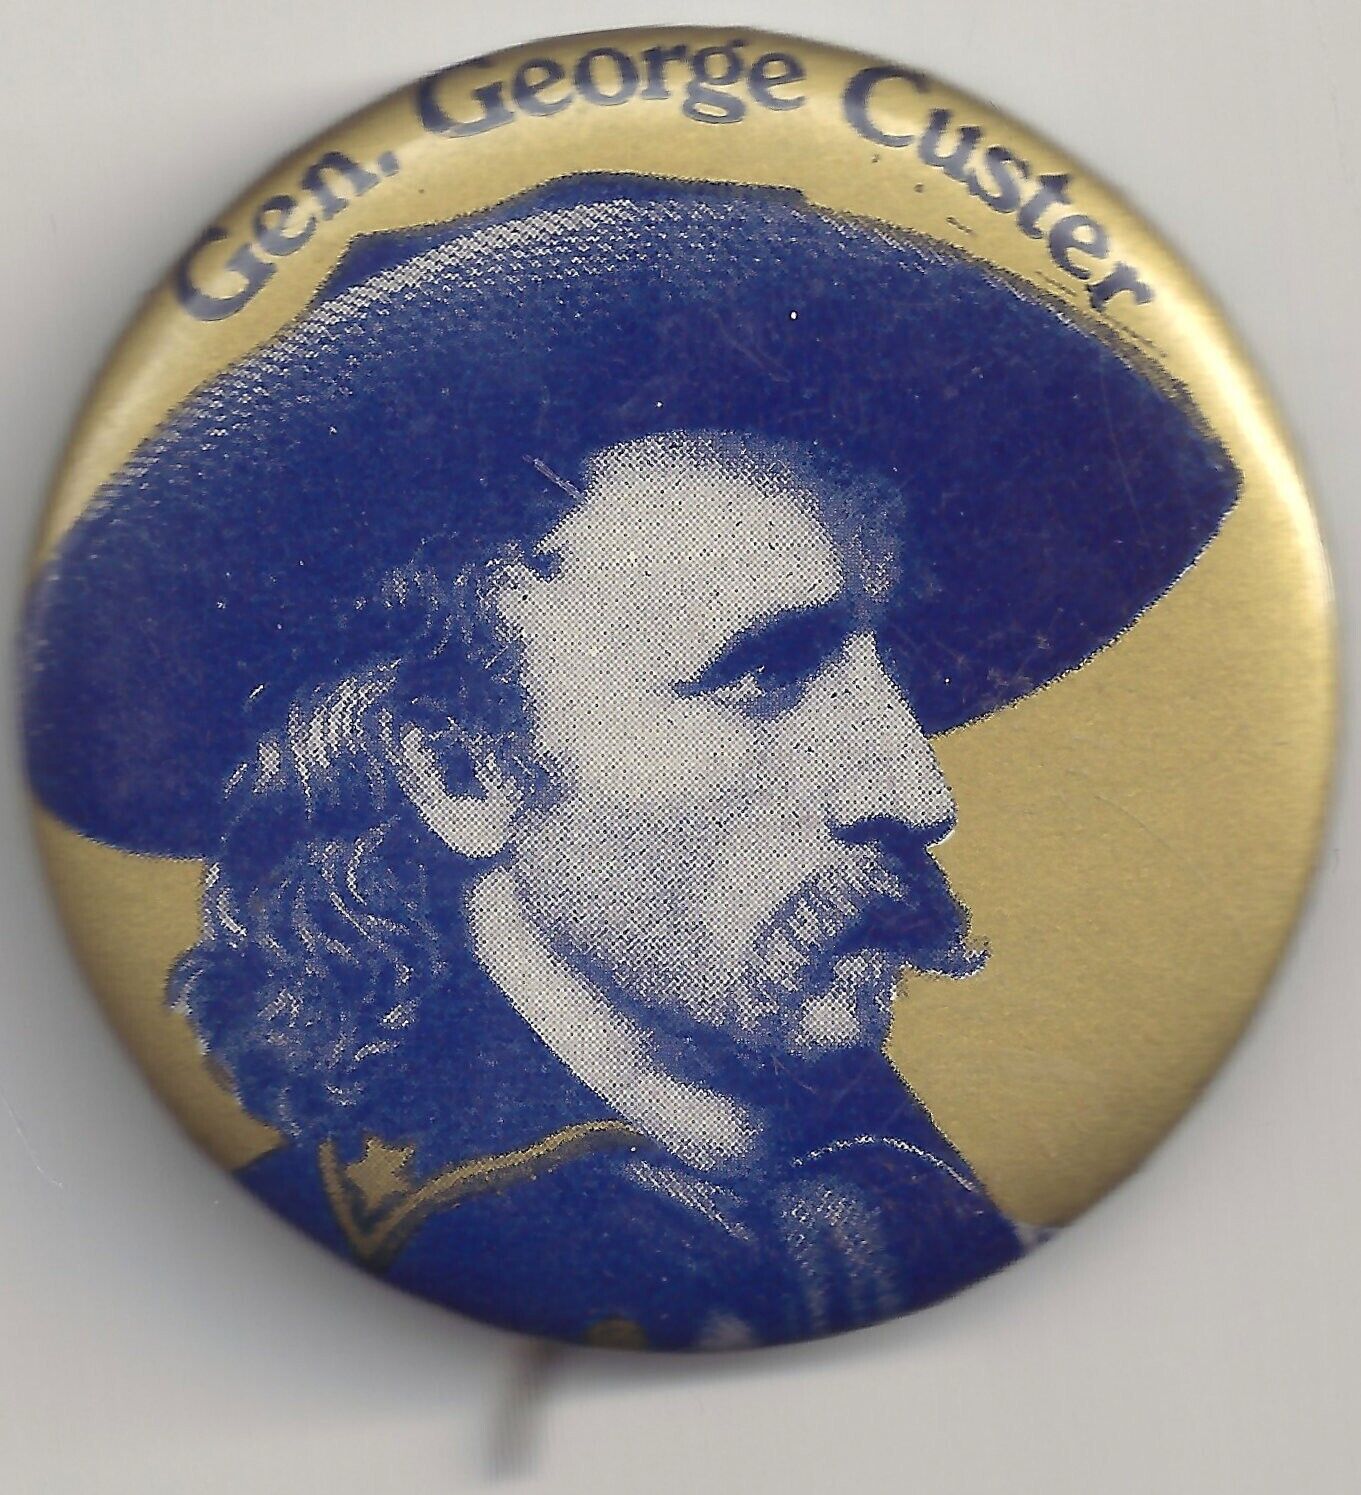 Gen. GEORGE CUSTER Pinback pin U.S. Army Officer button